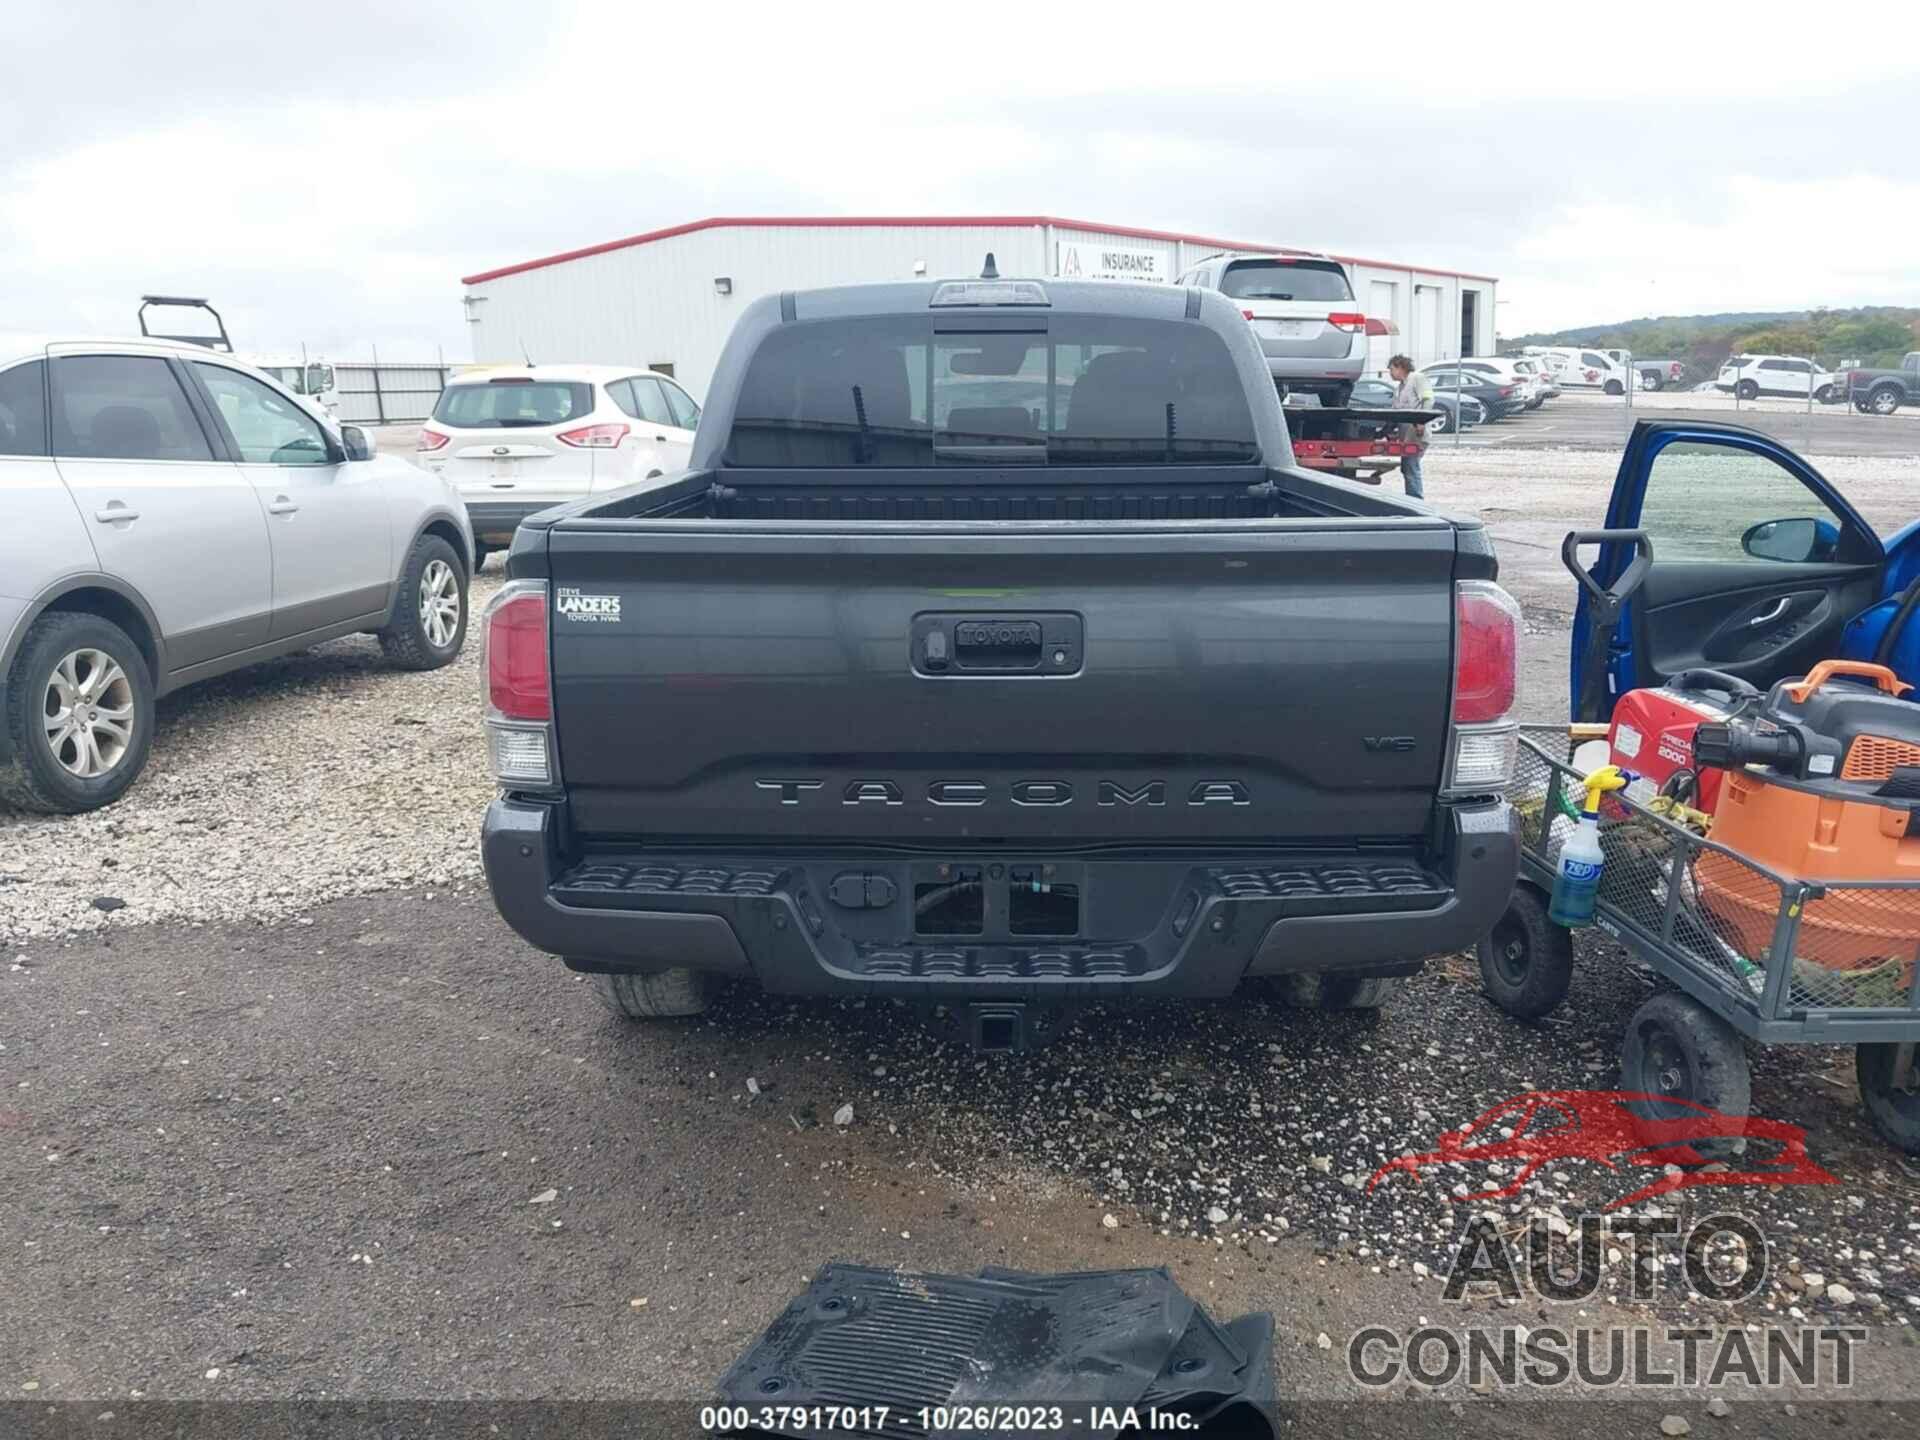 TOYOTA TACOMA 4WD 2020 - 3TMCZ5ANXLM344334